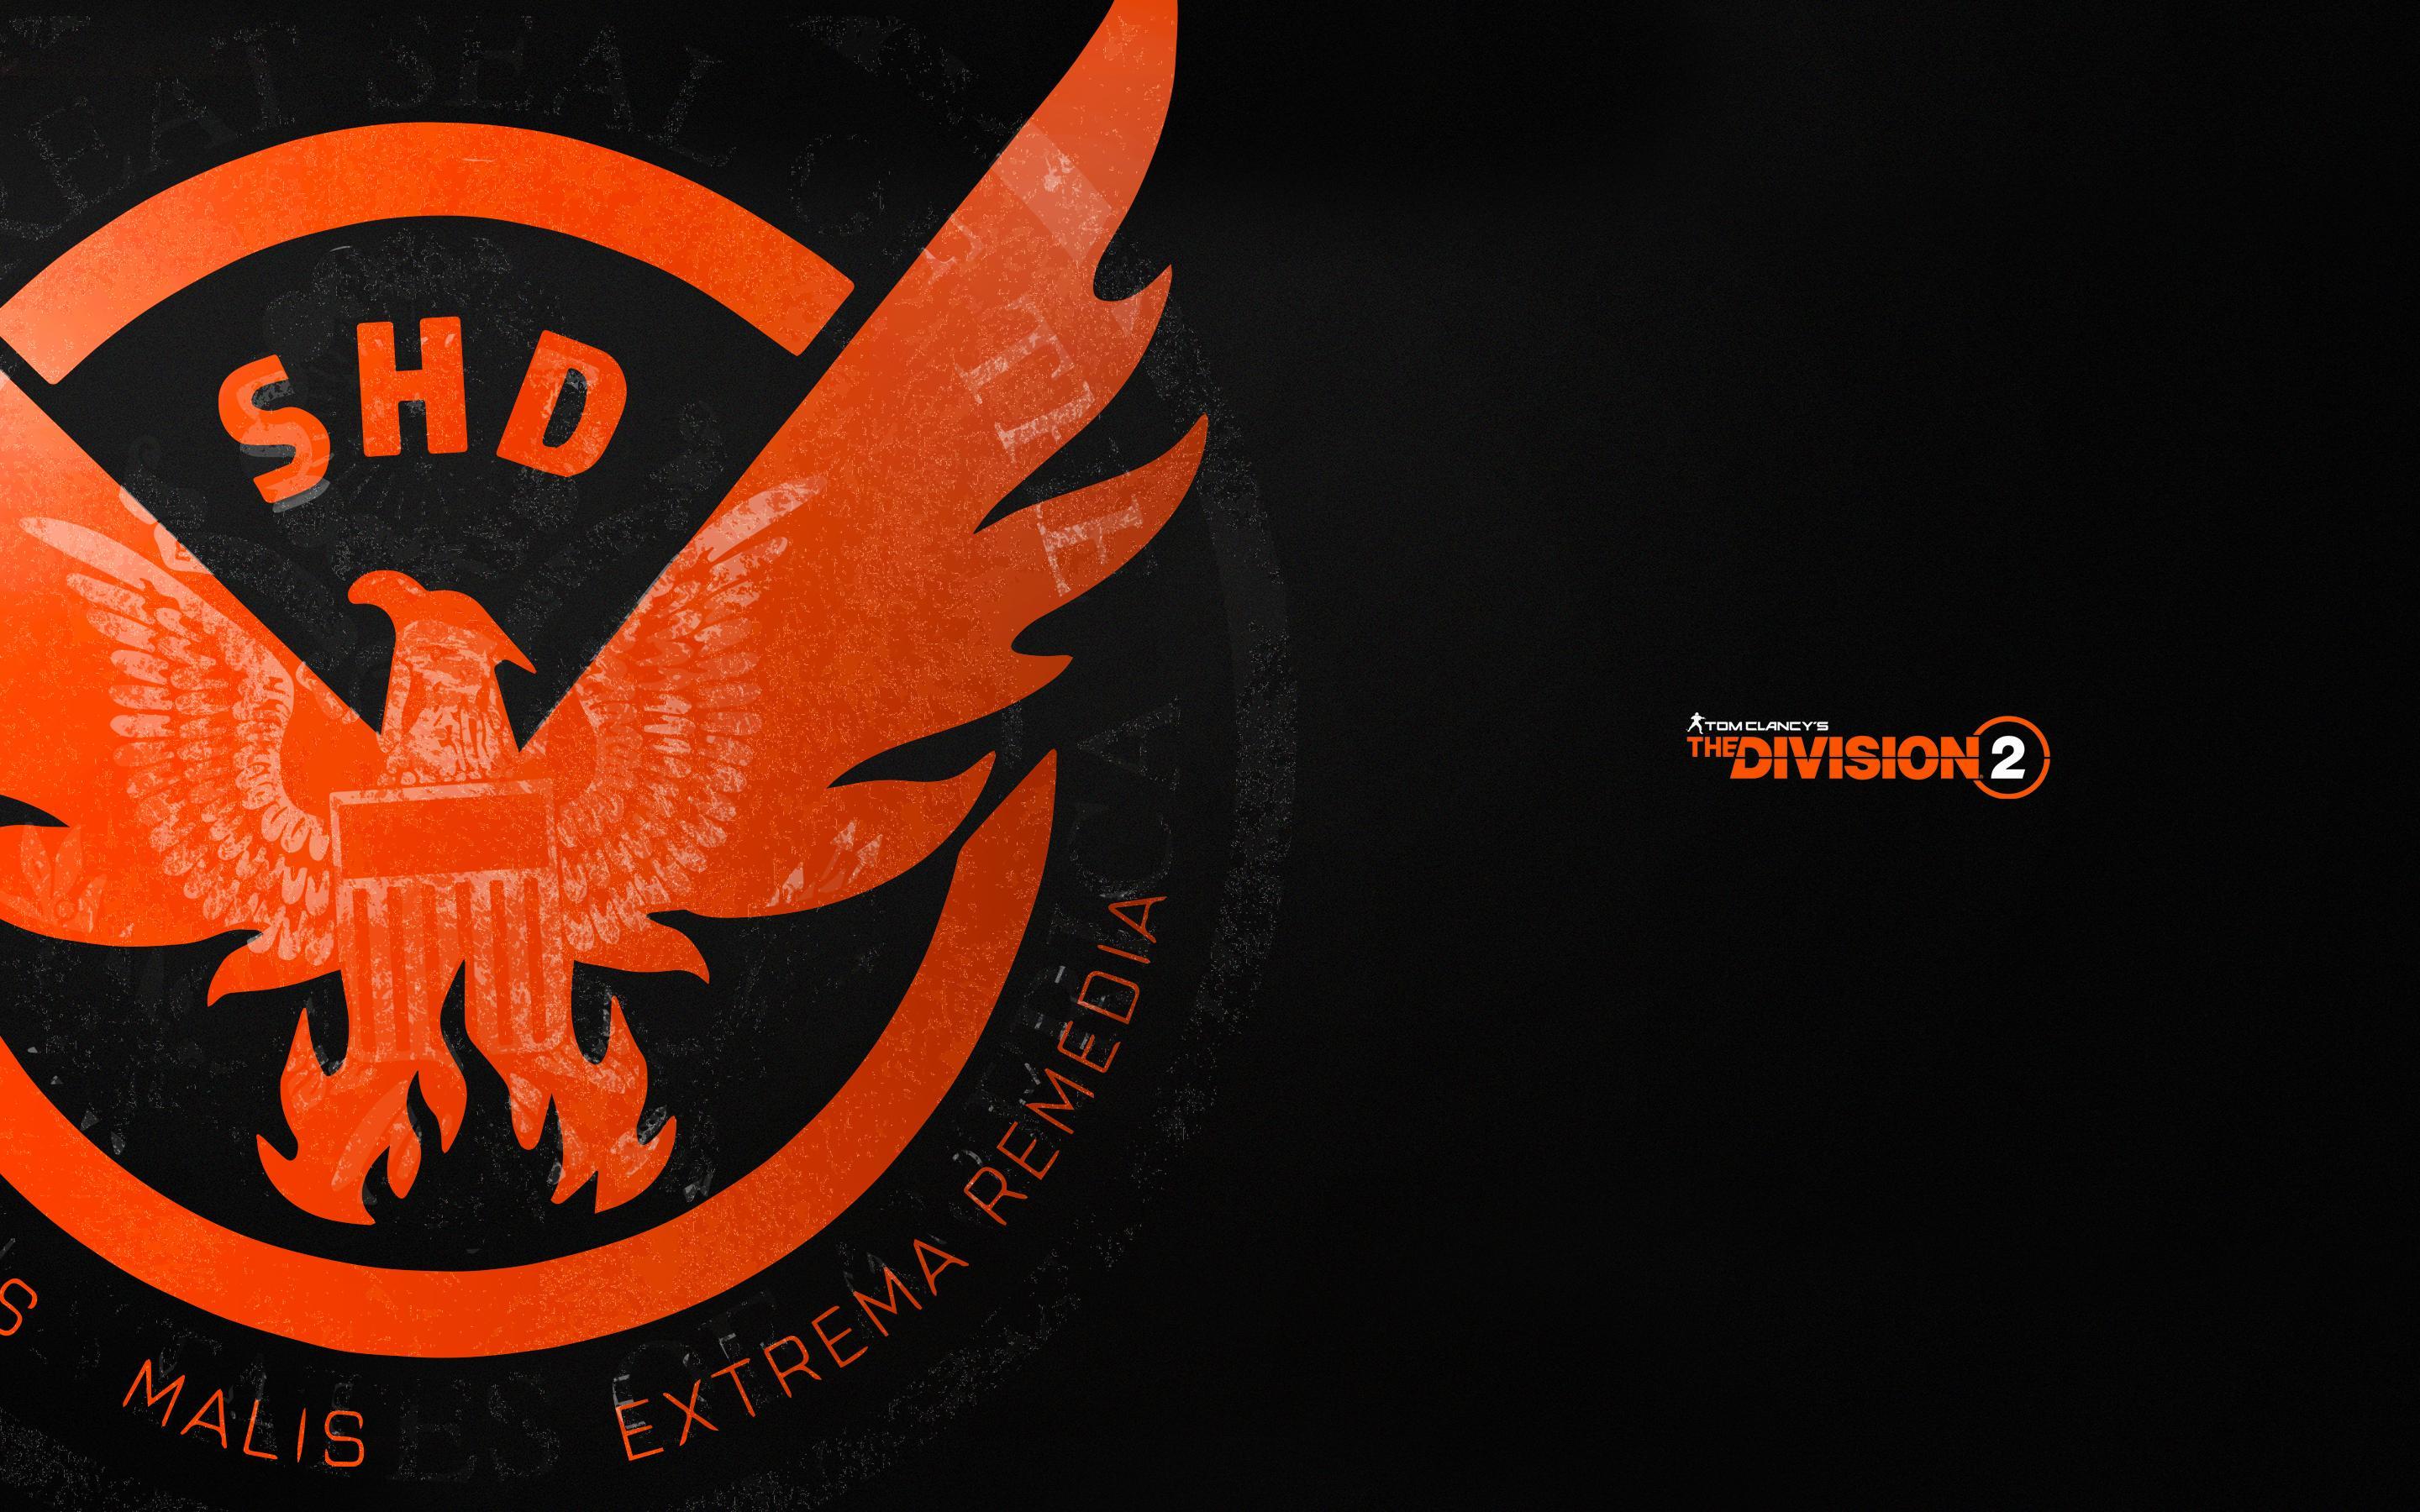 The Division 2 Wallpaper & Mobile Division 2